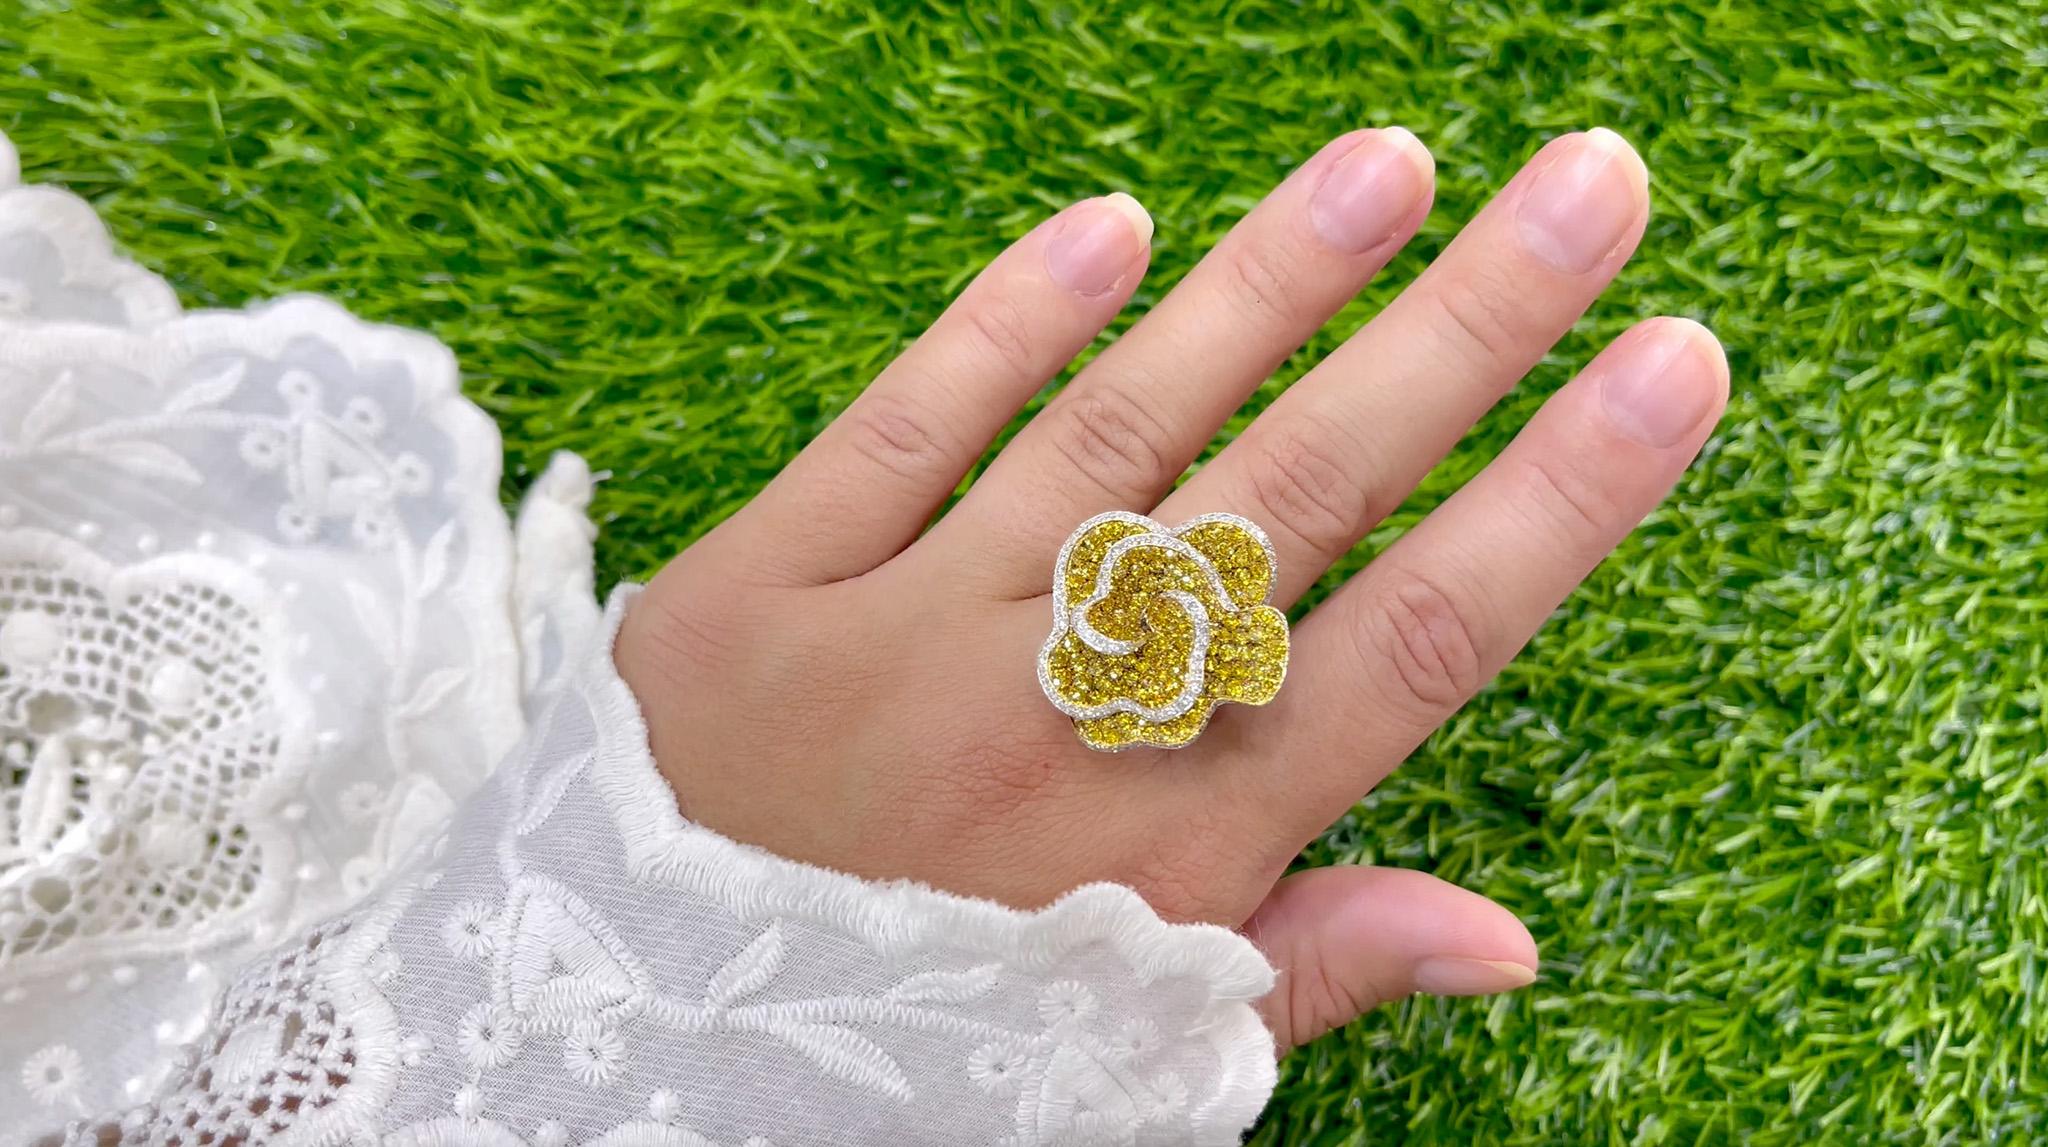 Beautiful Flashy Flower Cocktail Ring Set With Fancy Yellow Diamonds. It comes with an appraisal by GIA G.G. 
Total Carat Weight of Diamonds is 6.31 Carats
Metal is 18K Gold
Ring Size = 7 US
It can be resized complimentary 